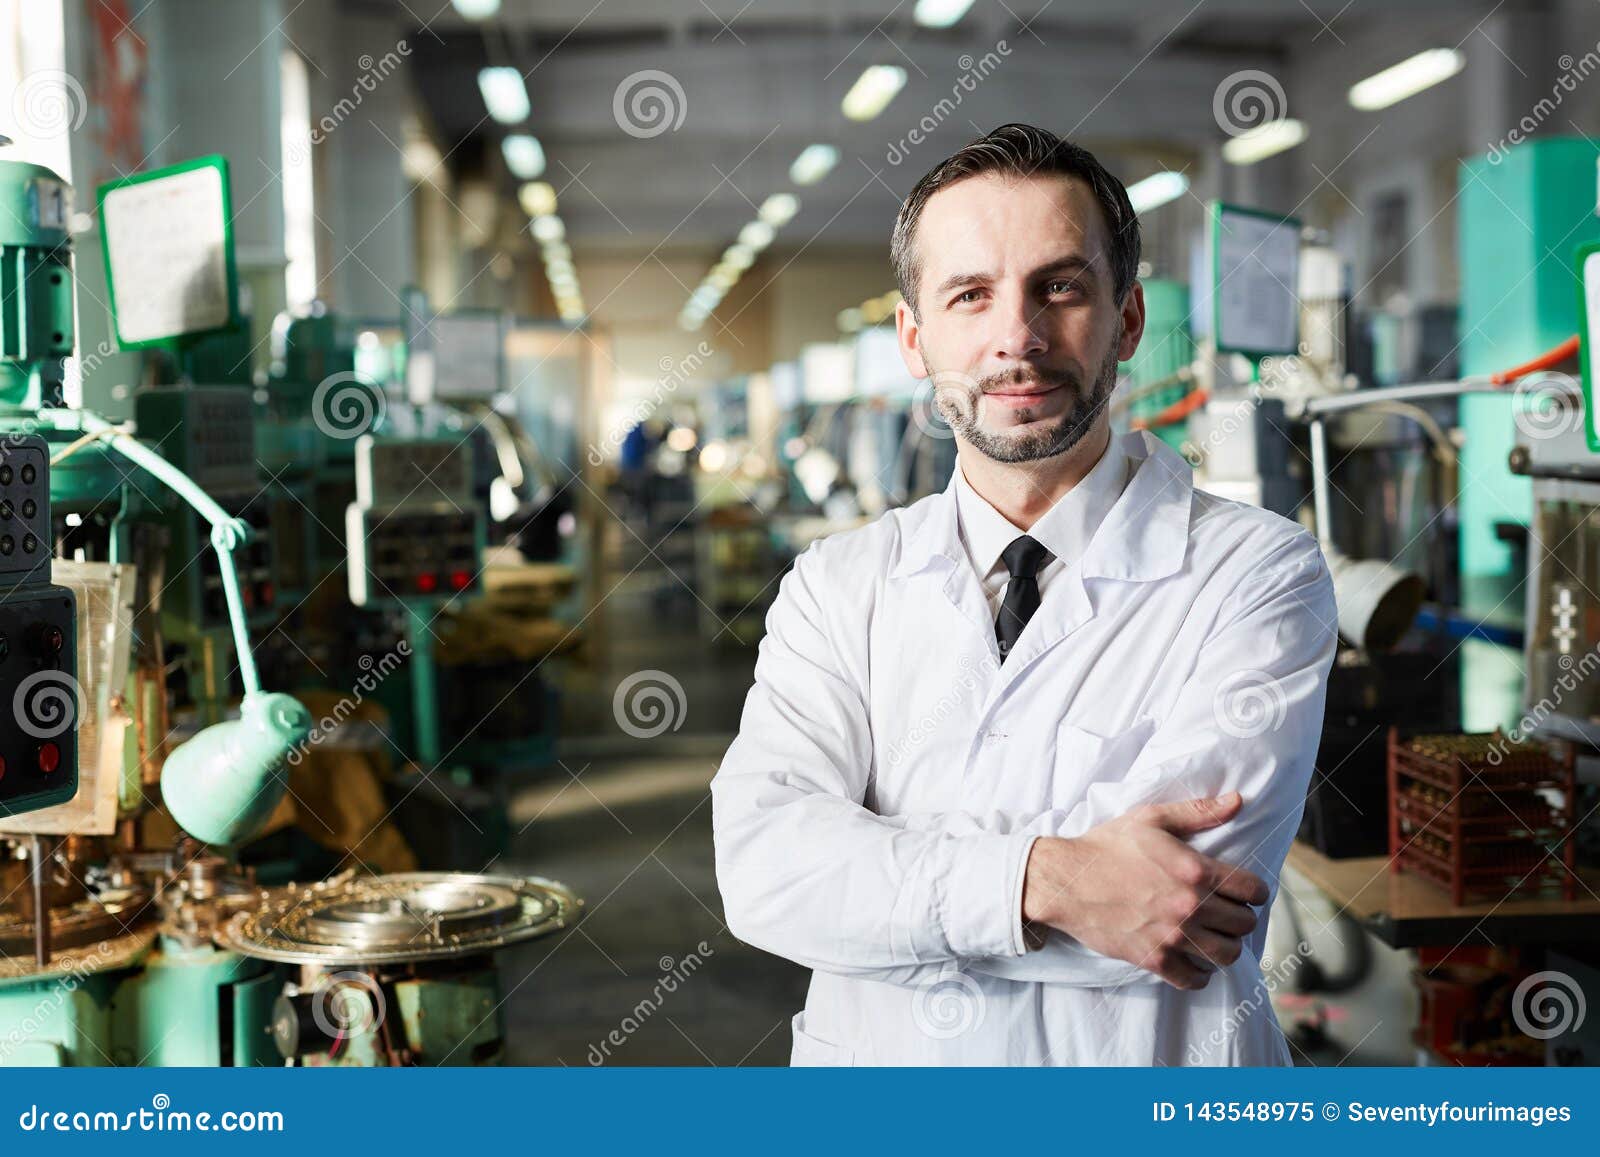 Factory Inspector Posing Stock Image Image Of Arms 143548975